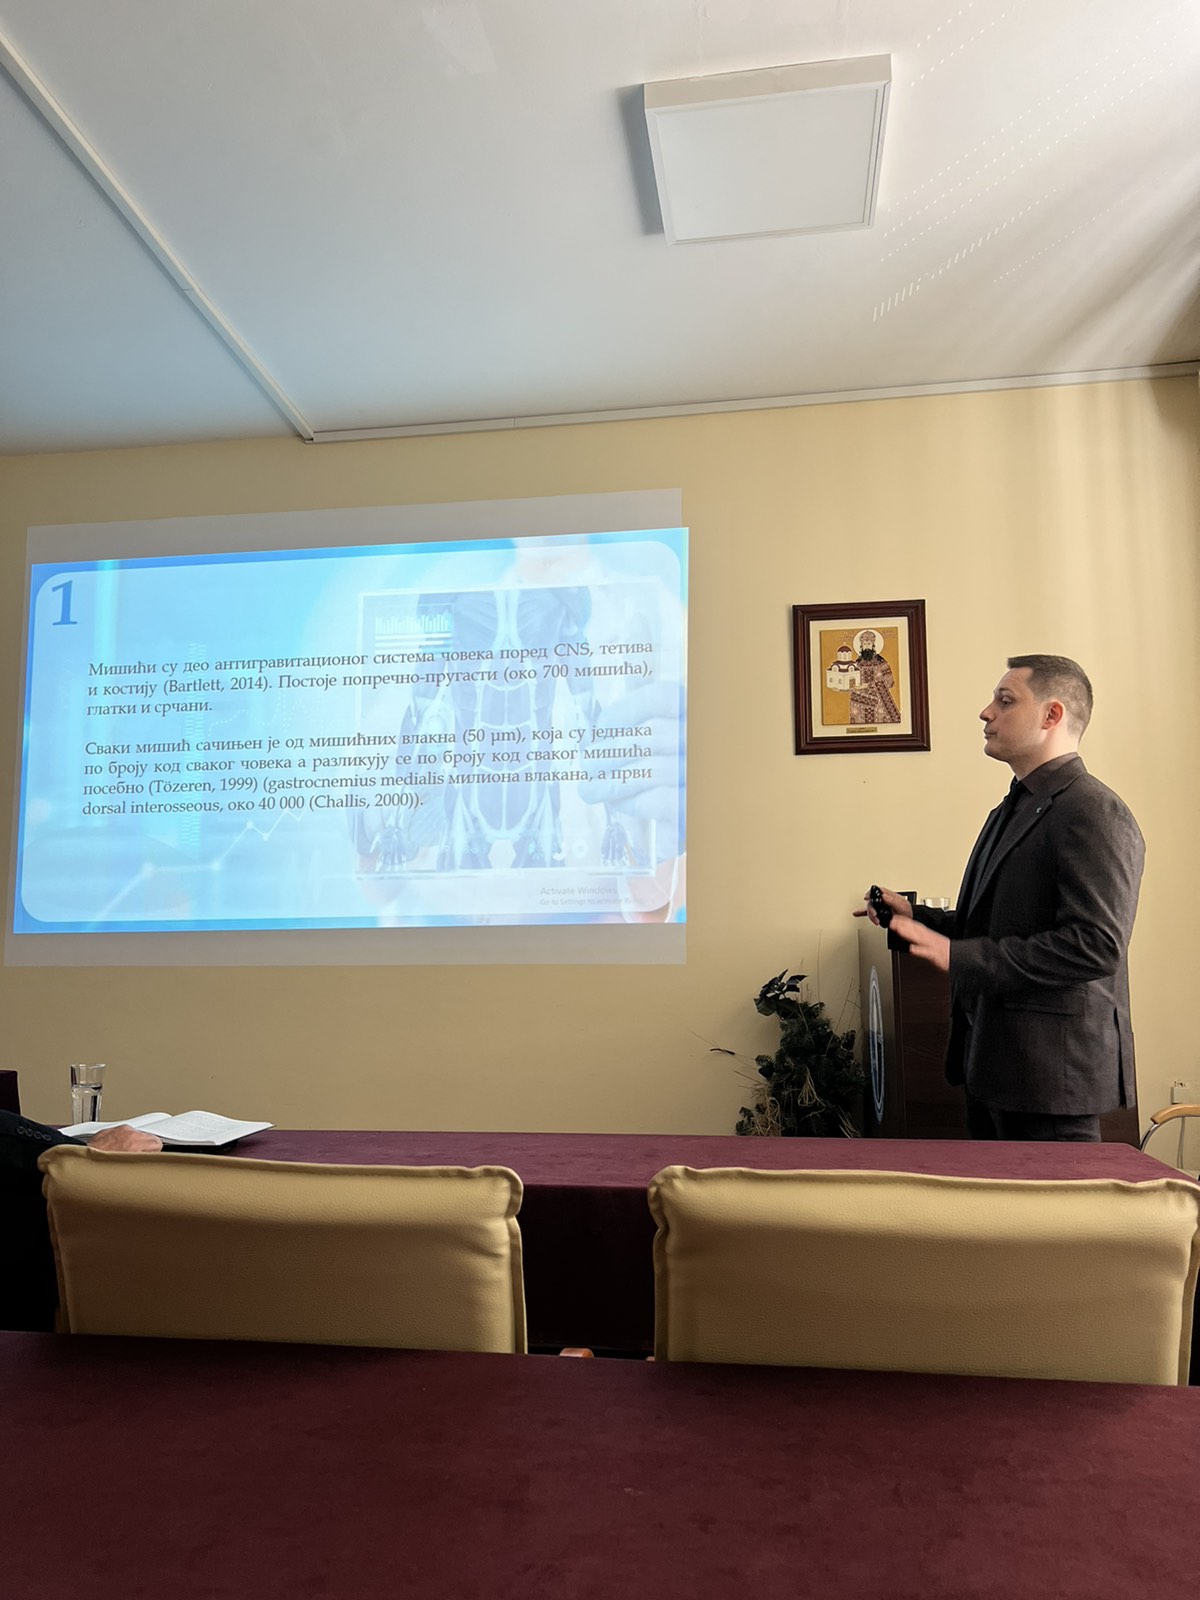 The Institute for Medical Research with great honor and pleasure informs the public about the doctoral dissertation defense of colleague Dr. Nikola Prvulović from the Group for Nutritional Biochemistry and Dietology